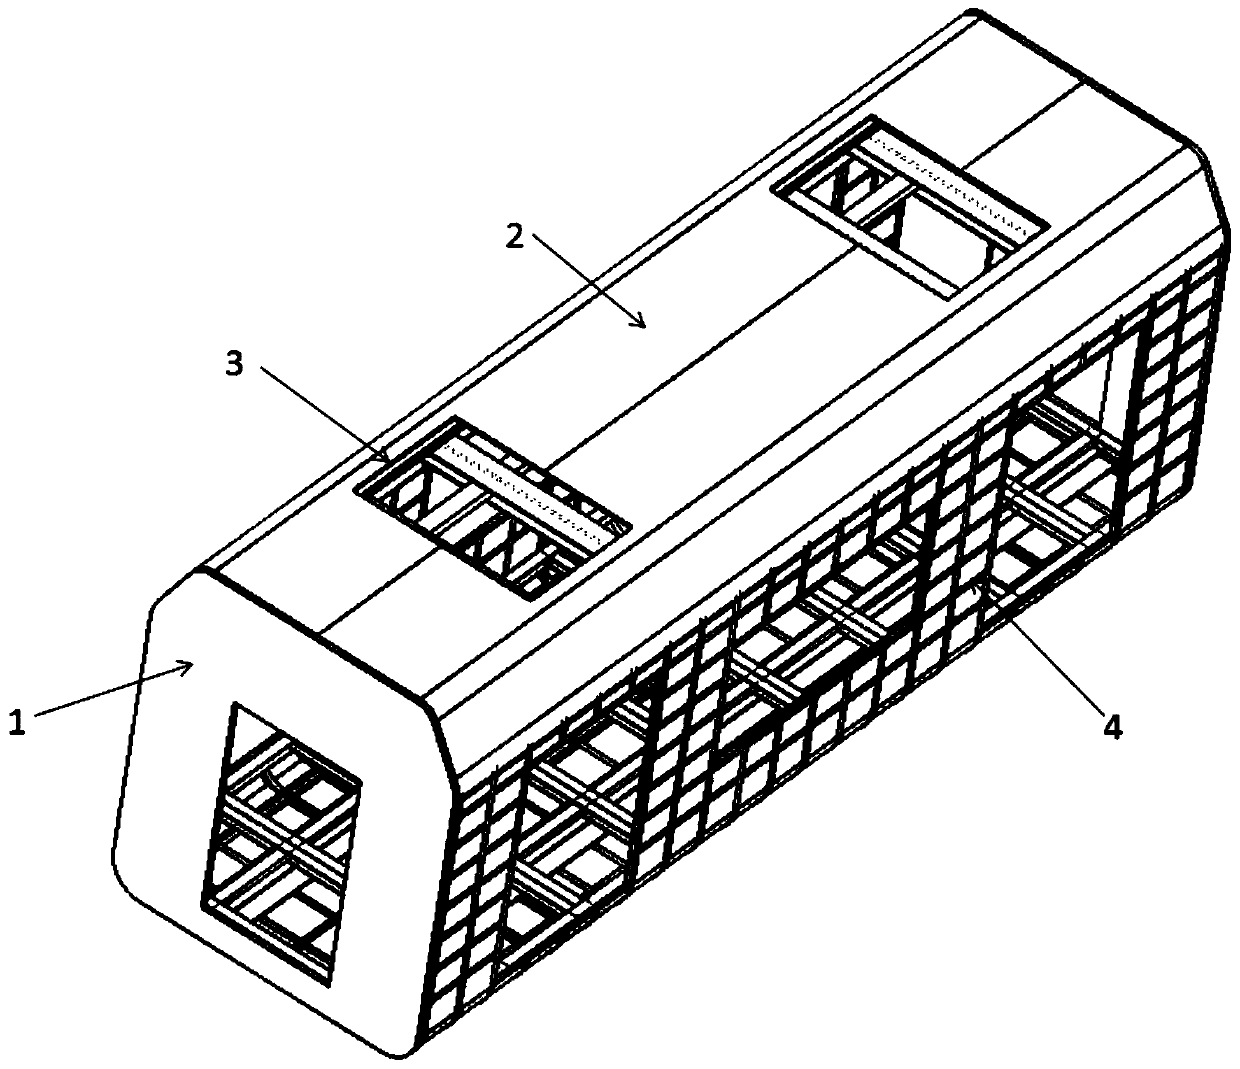 Low-cost carbon fiber composite empty rail car body and its manufacturing process